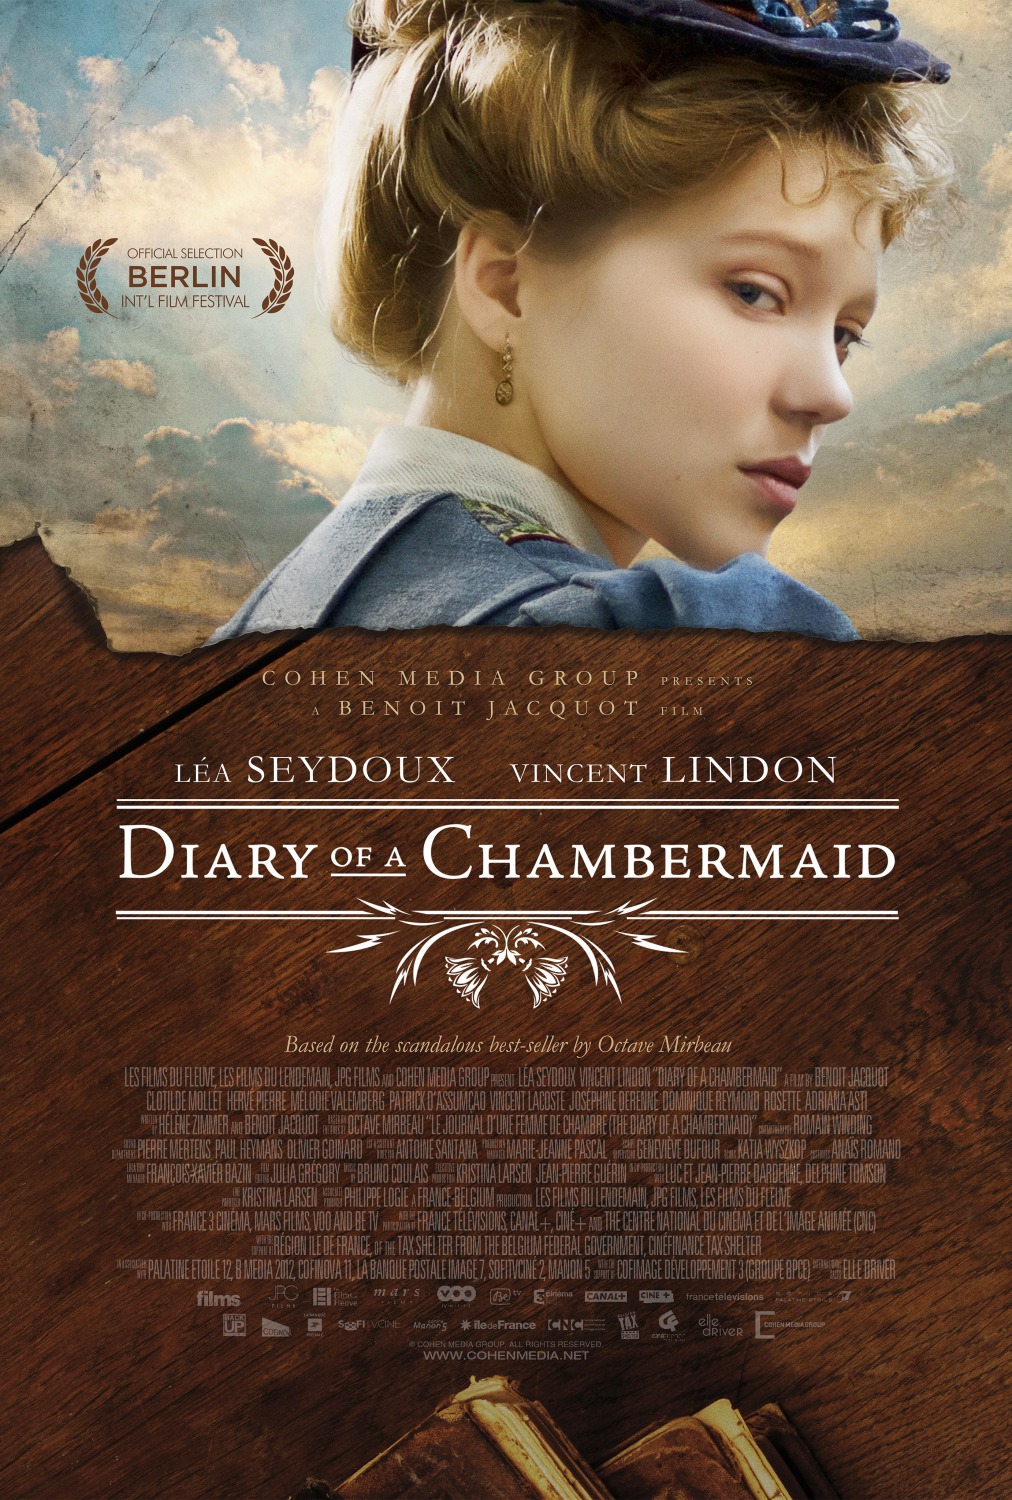 Extra Large Movie Poster Image for Journal d'une femme de chambre (#2 of 2)